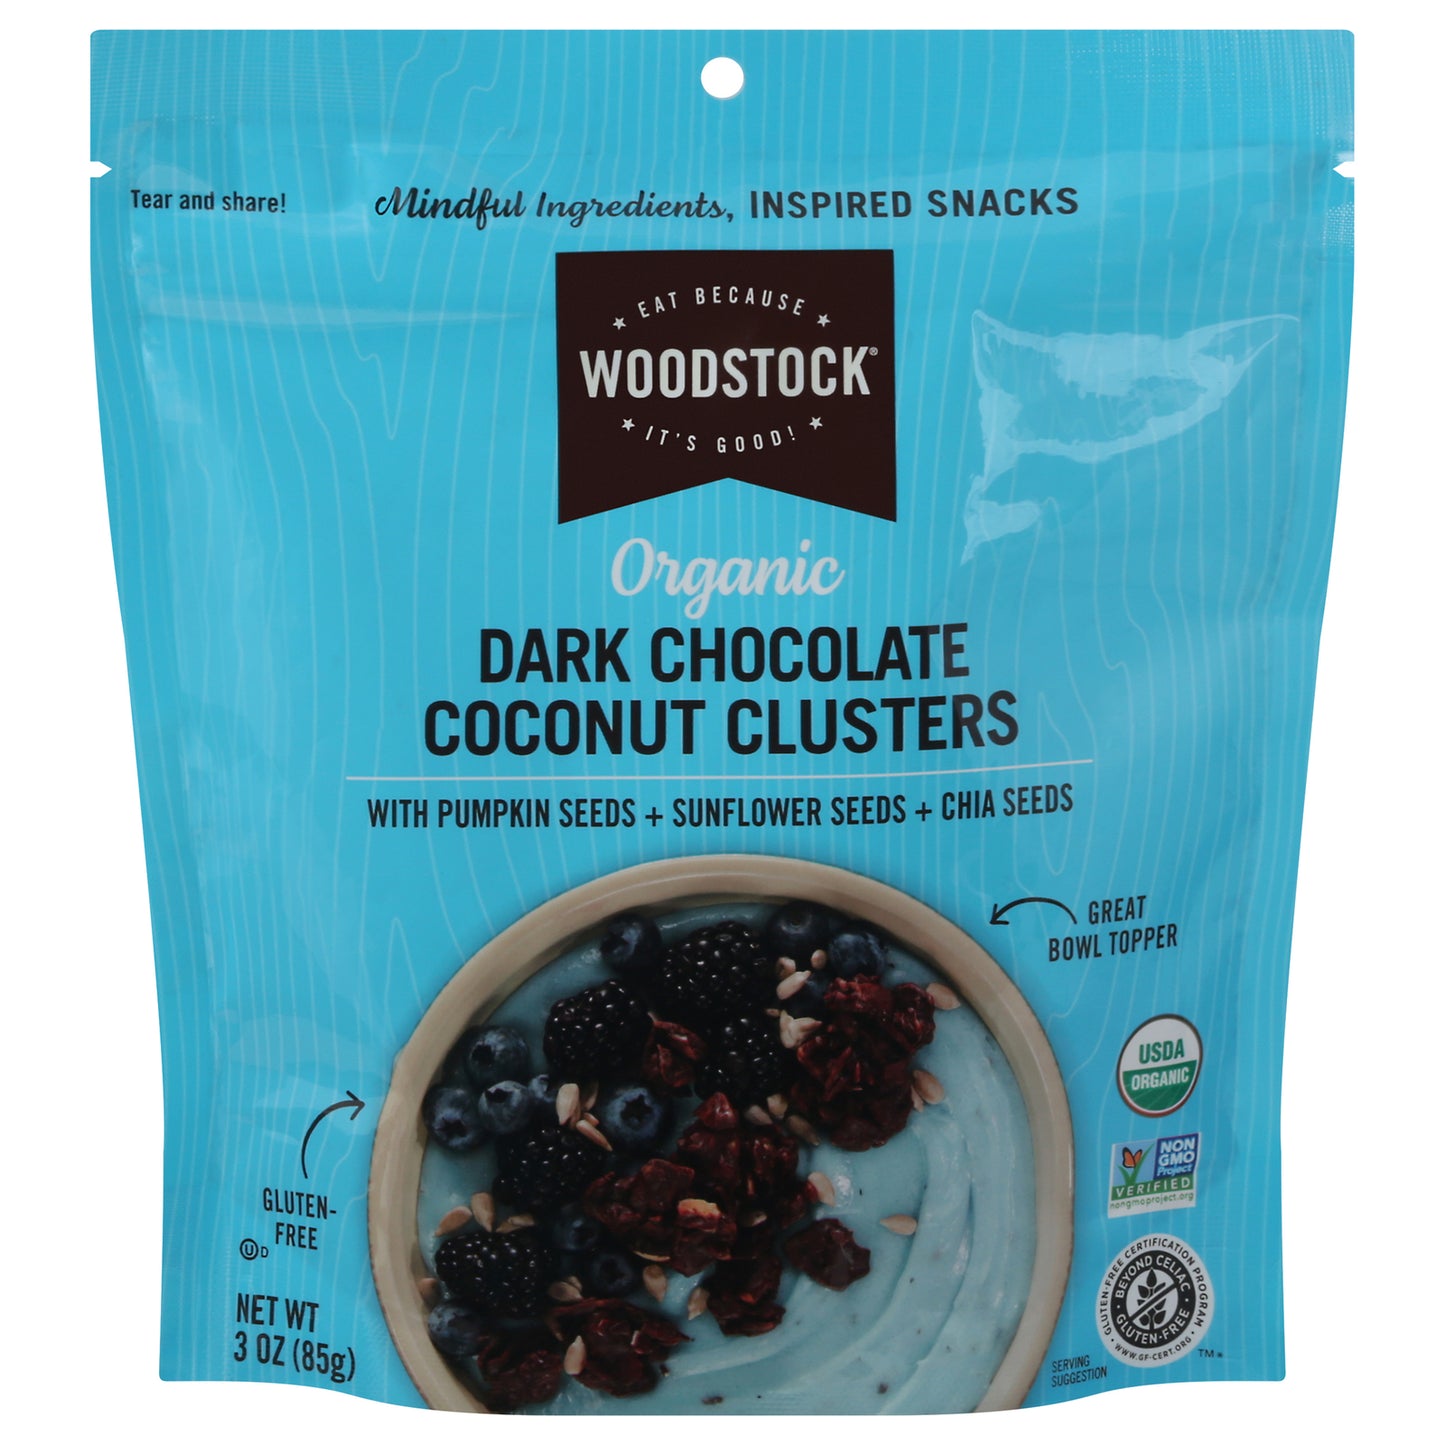 Woodstock - Cnut/clst Flx Qin Seed - Case Of 12-3 Oz